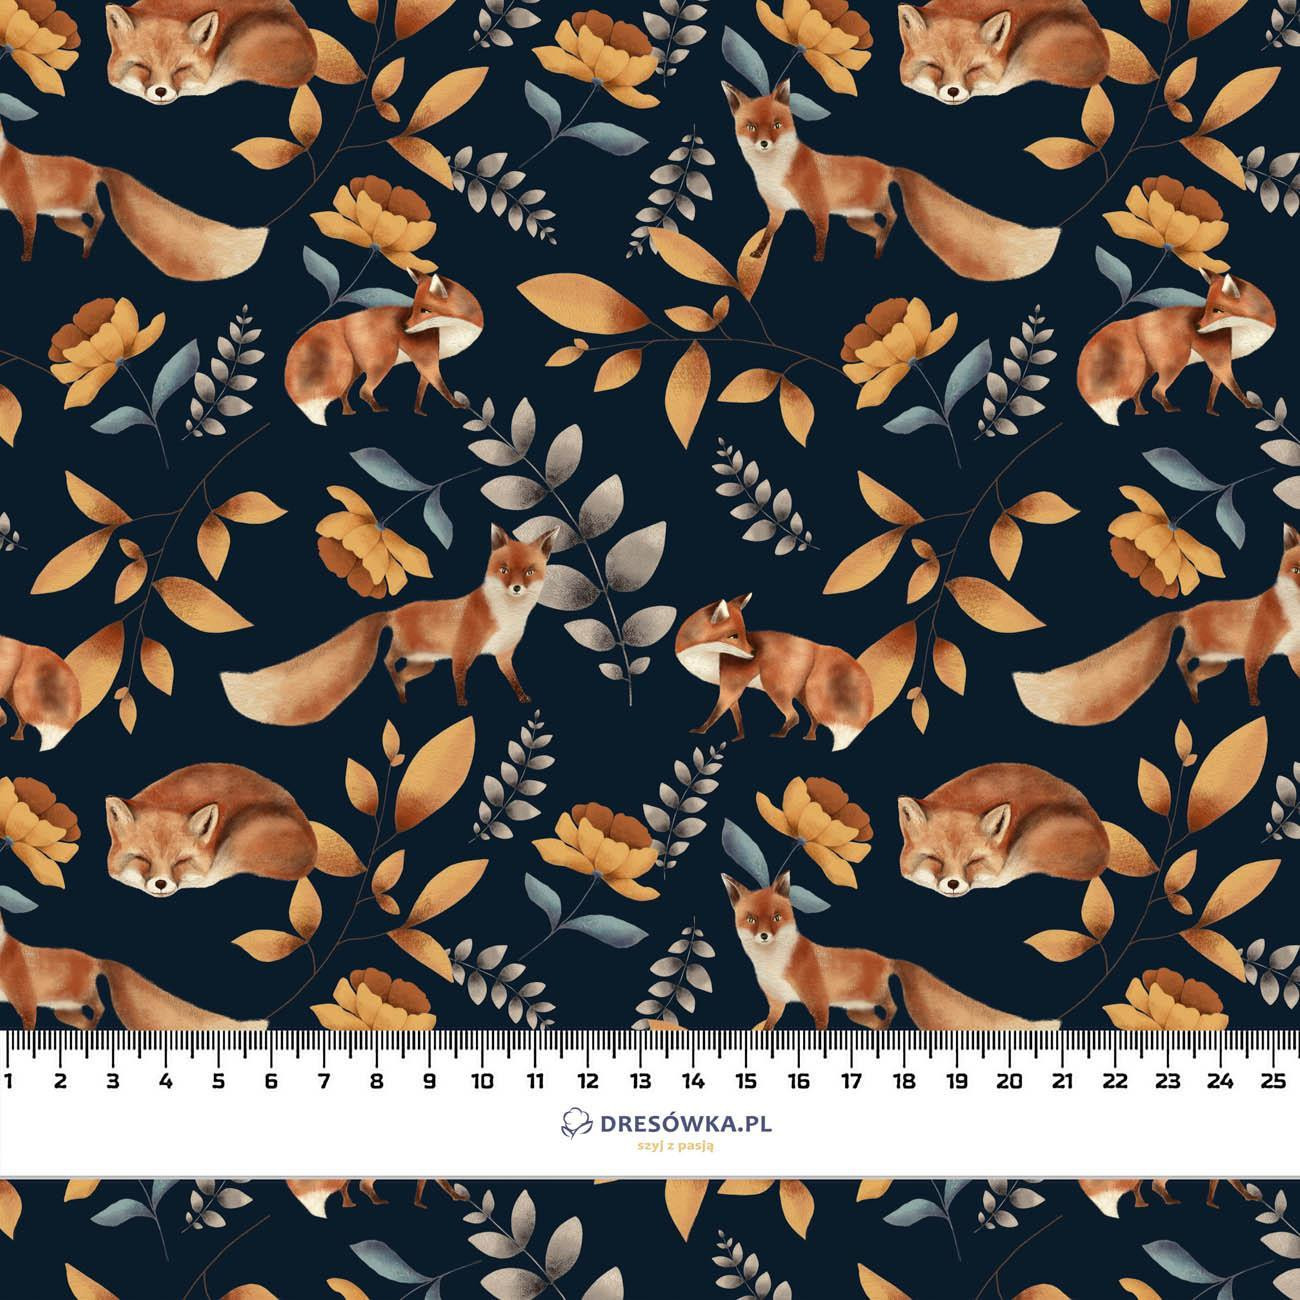 FOX TIME (INTO THE WOODS) - Cotton woven fabric